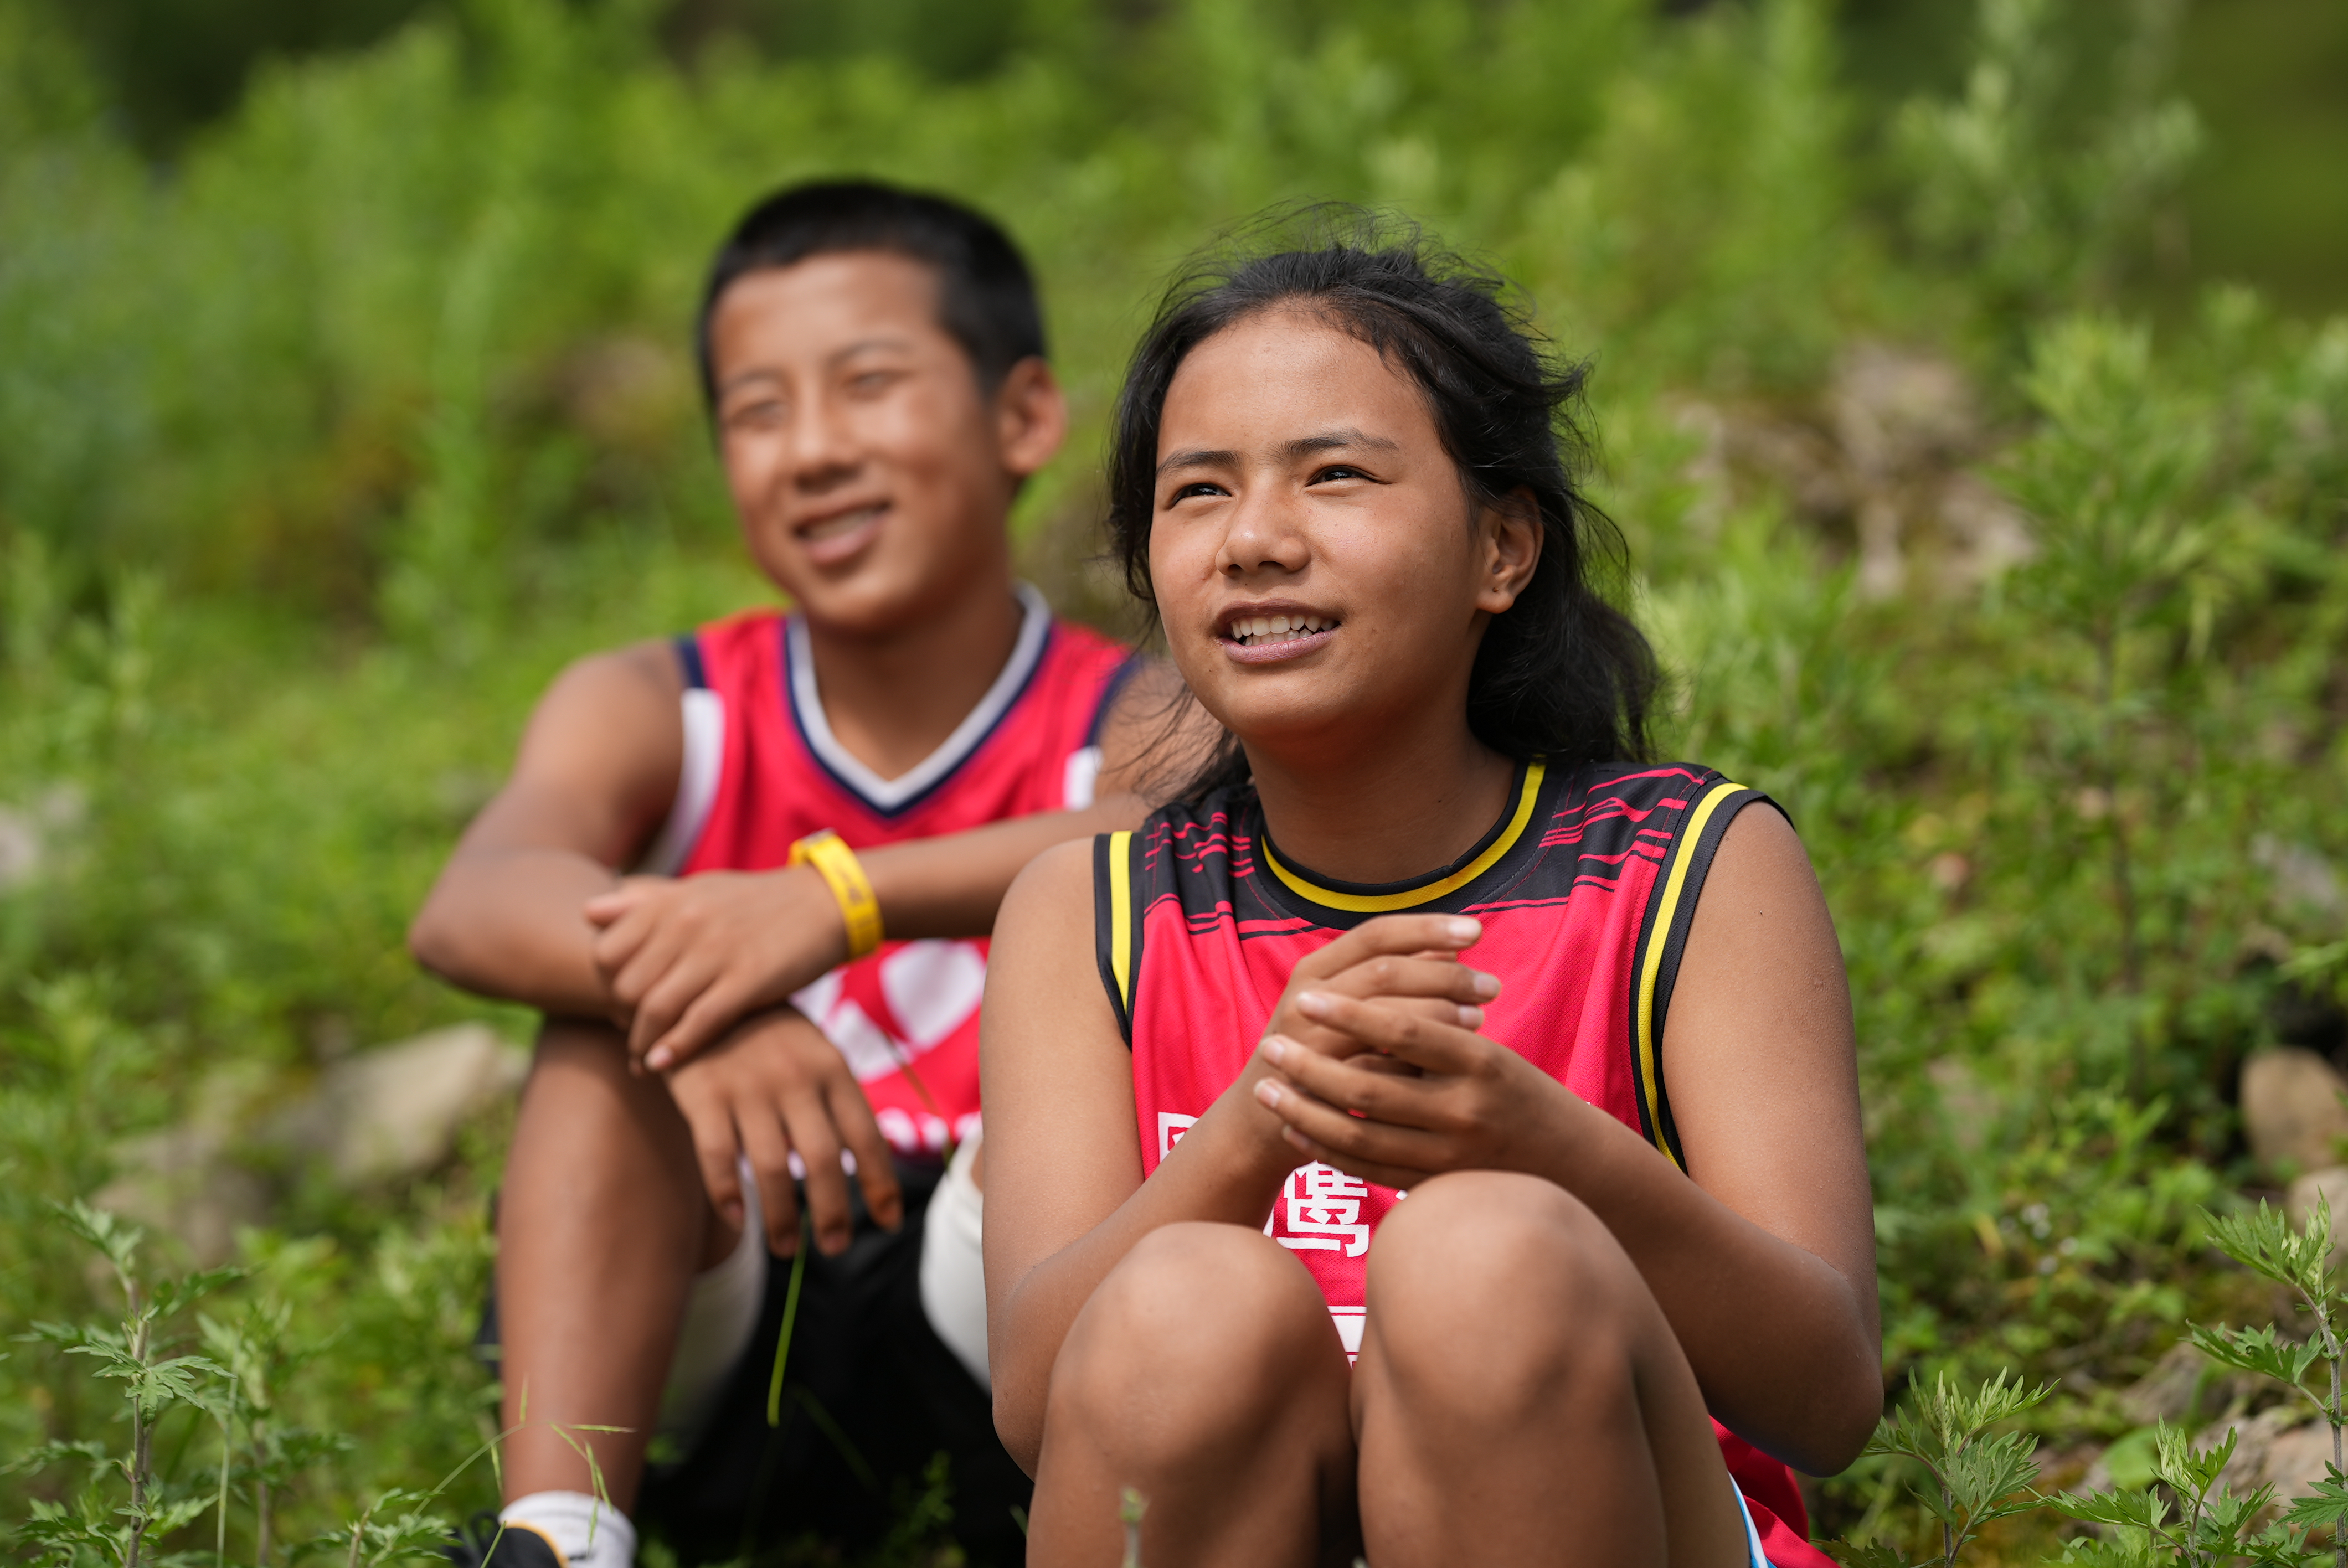 An undated photo shows 13-year-old girl Aguolieha and her teammate in Liangshan Yi Autonomous Prefecture, southwest China's Sichuan Province, after basketball trainings. Playing for a team called the “Blackhawks,” the name comes from the totem of the Yi ethnic group, with the meaning to soar fearlessly. /CGTN